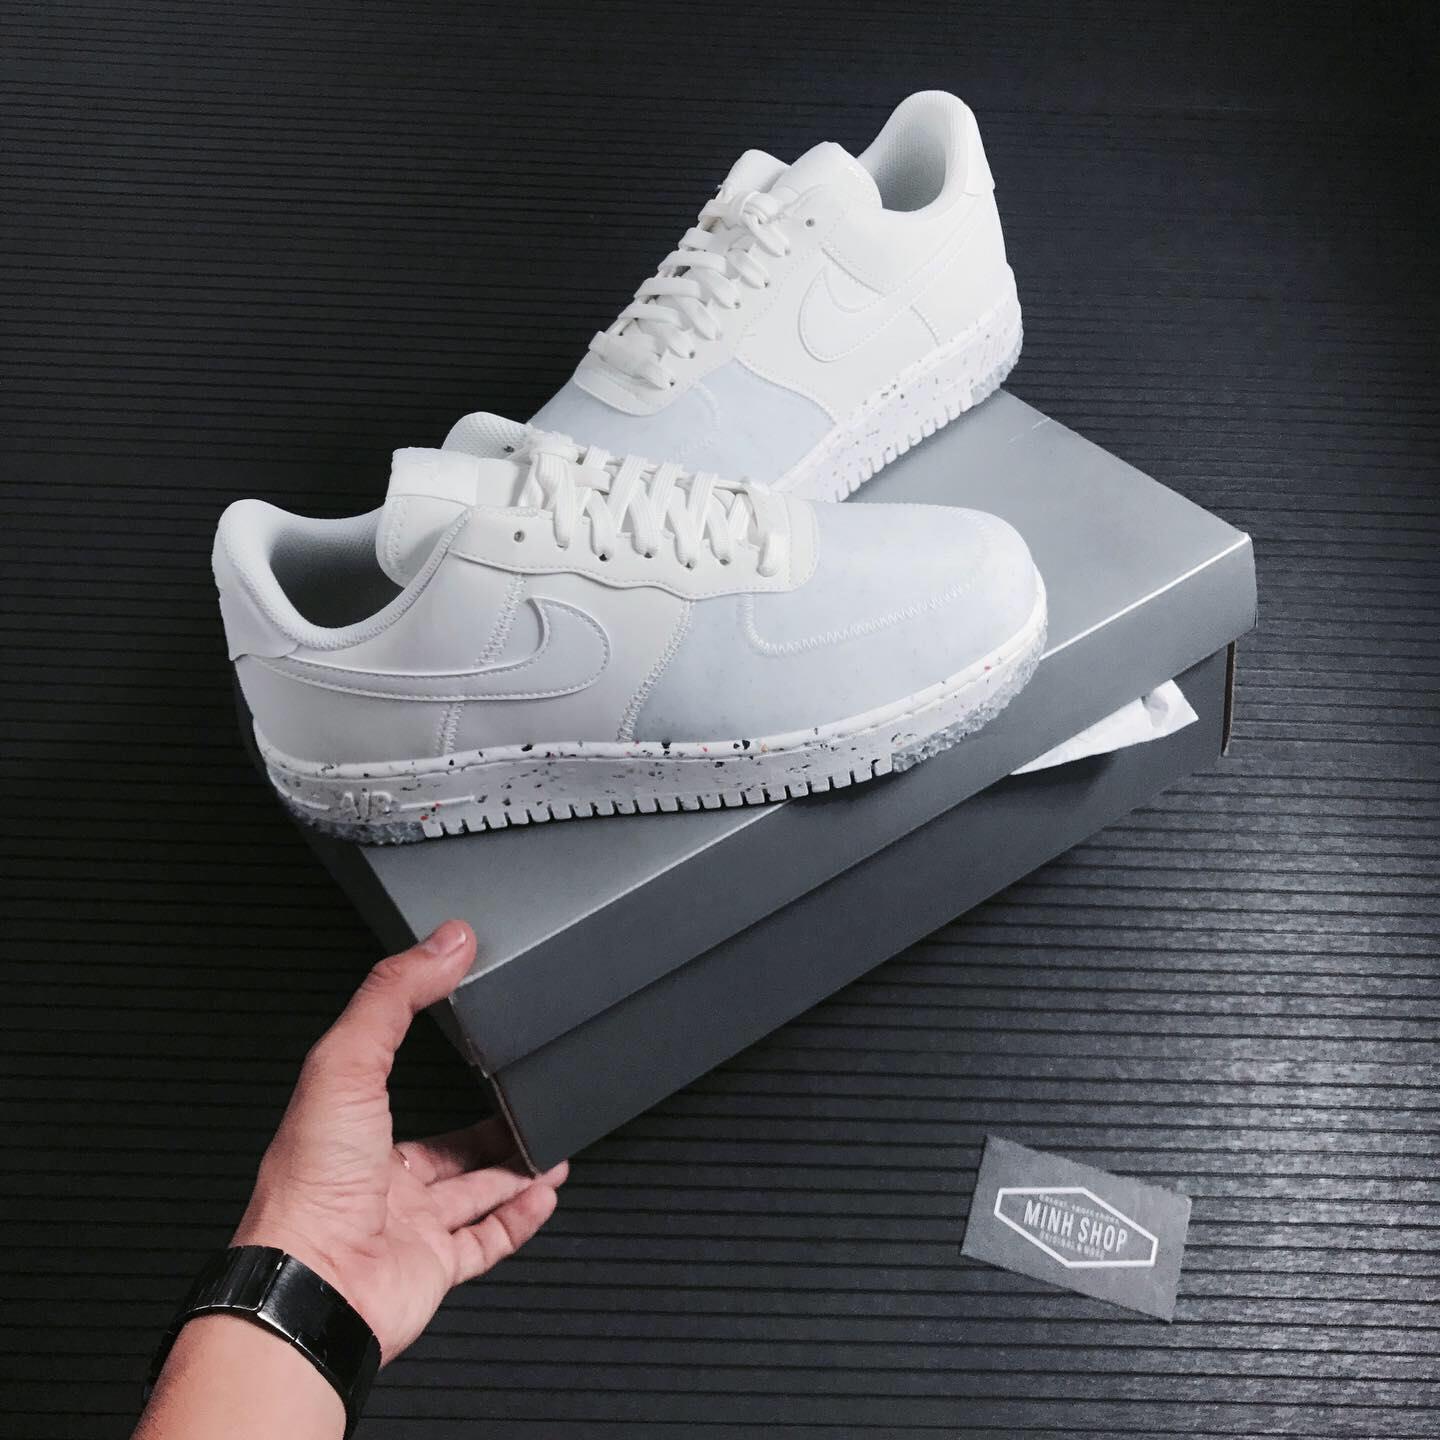 Minhshop.vn - SALE T3 Giày Nike Air Force 1 Crater Summit White